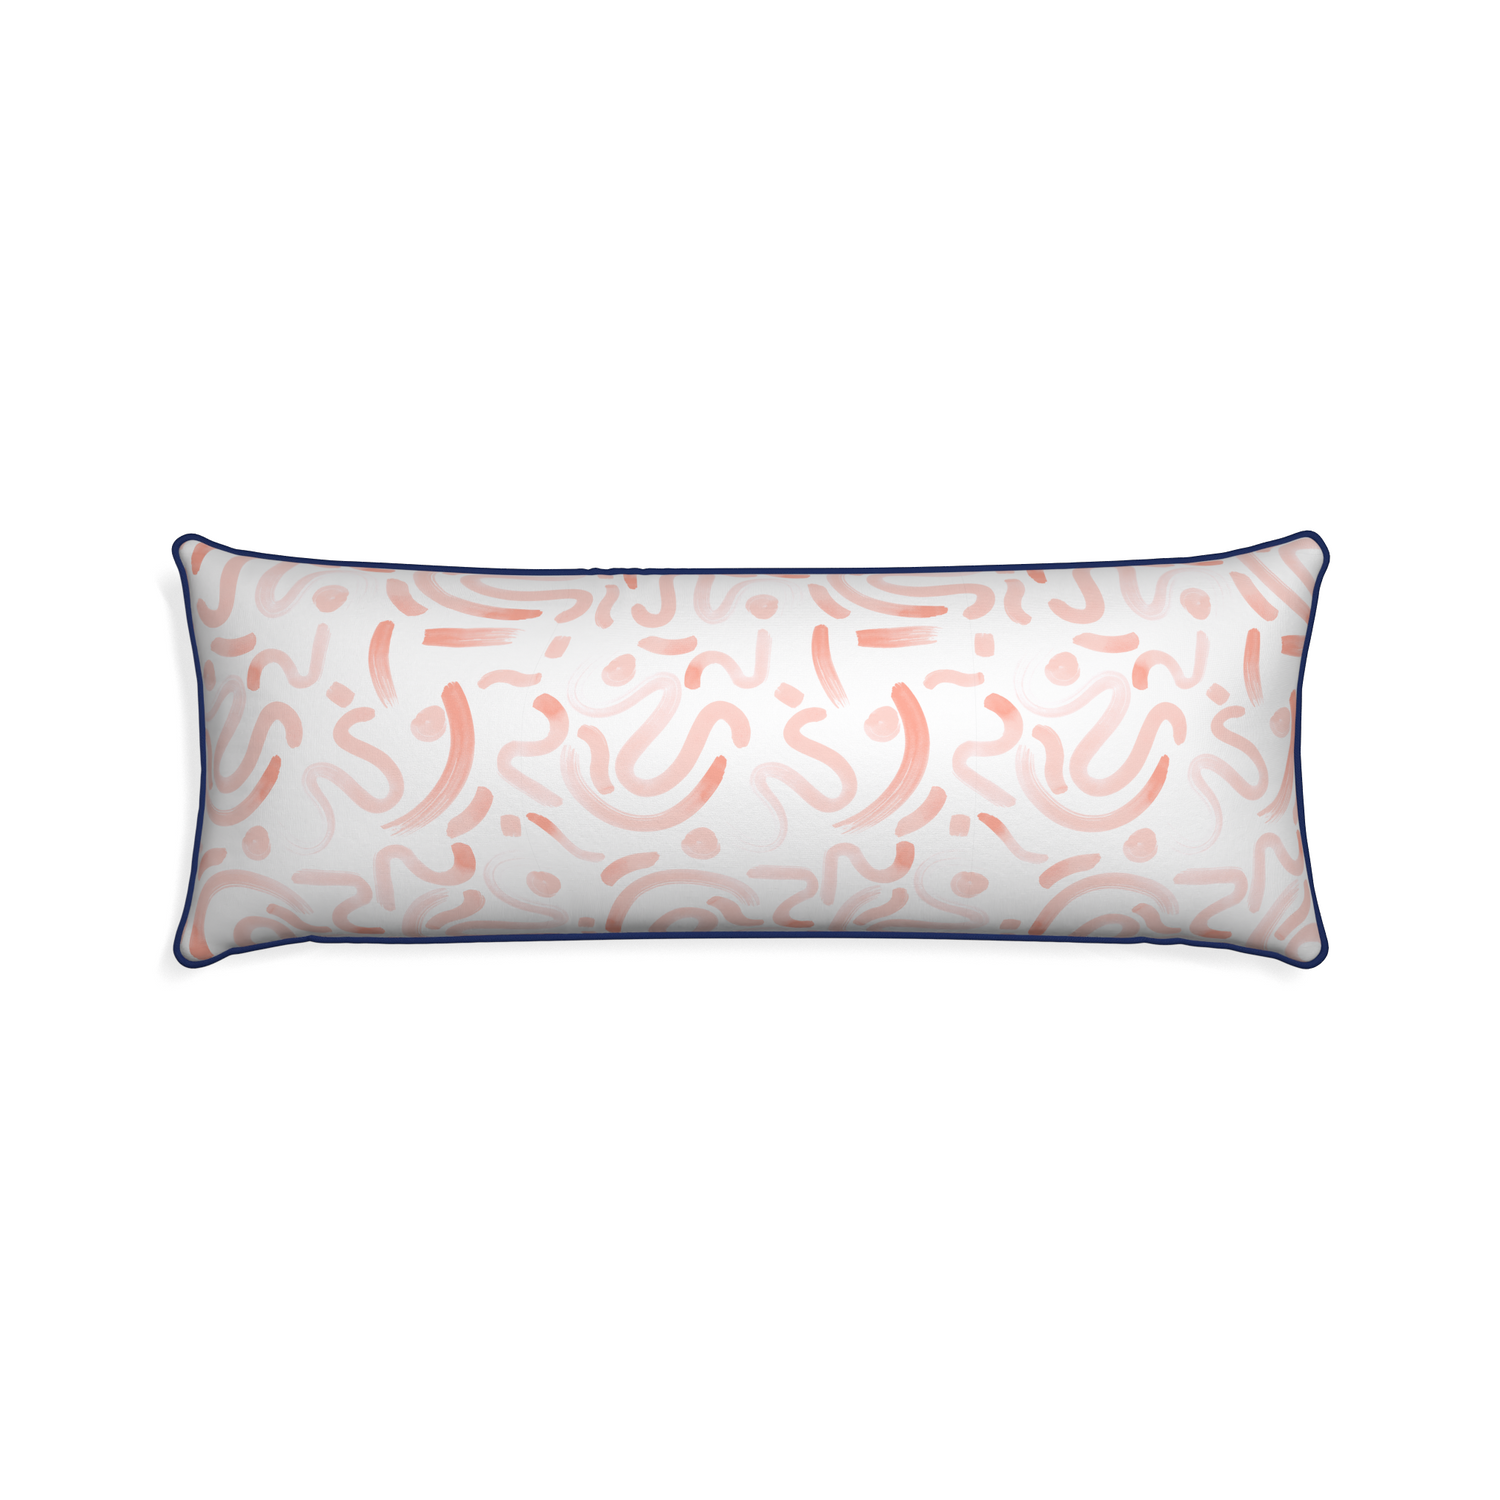 Xl-lumbar hockney pink custom pink graphicpillow with midnight piping on white background